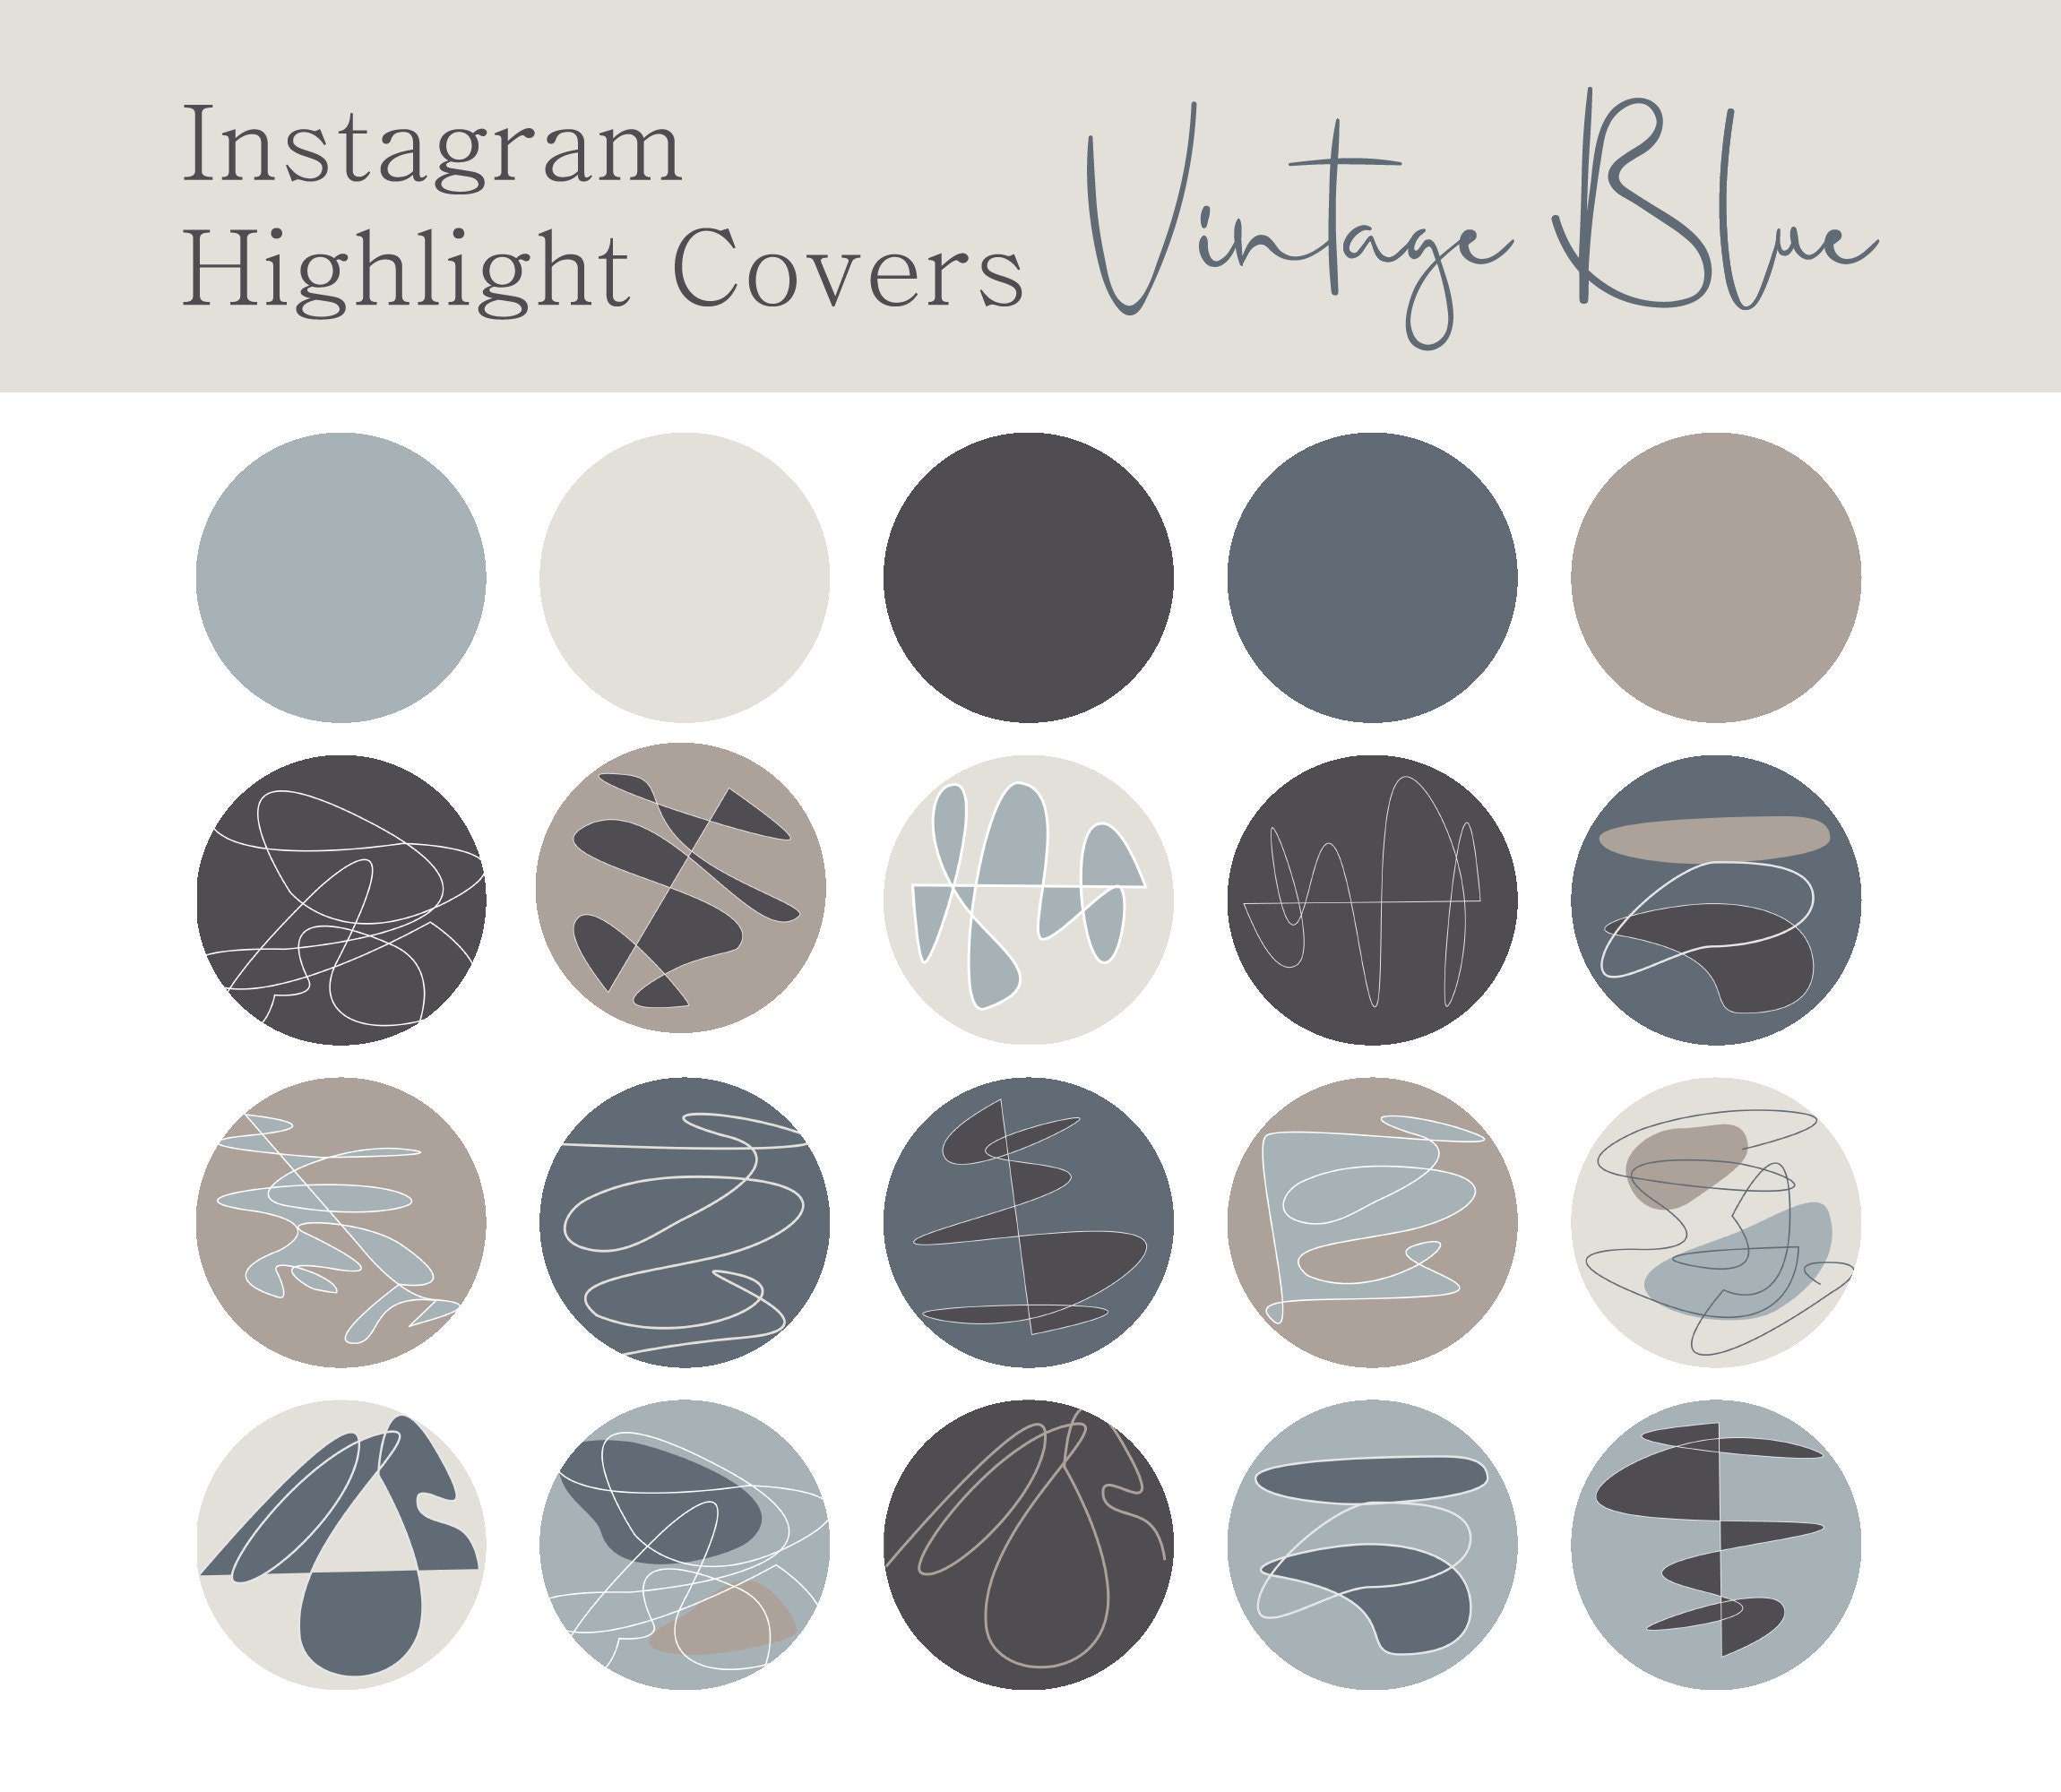 Vintage Blue Instagram 20 Highlight Covers ,png Icon, Blue Color ...